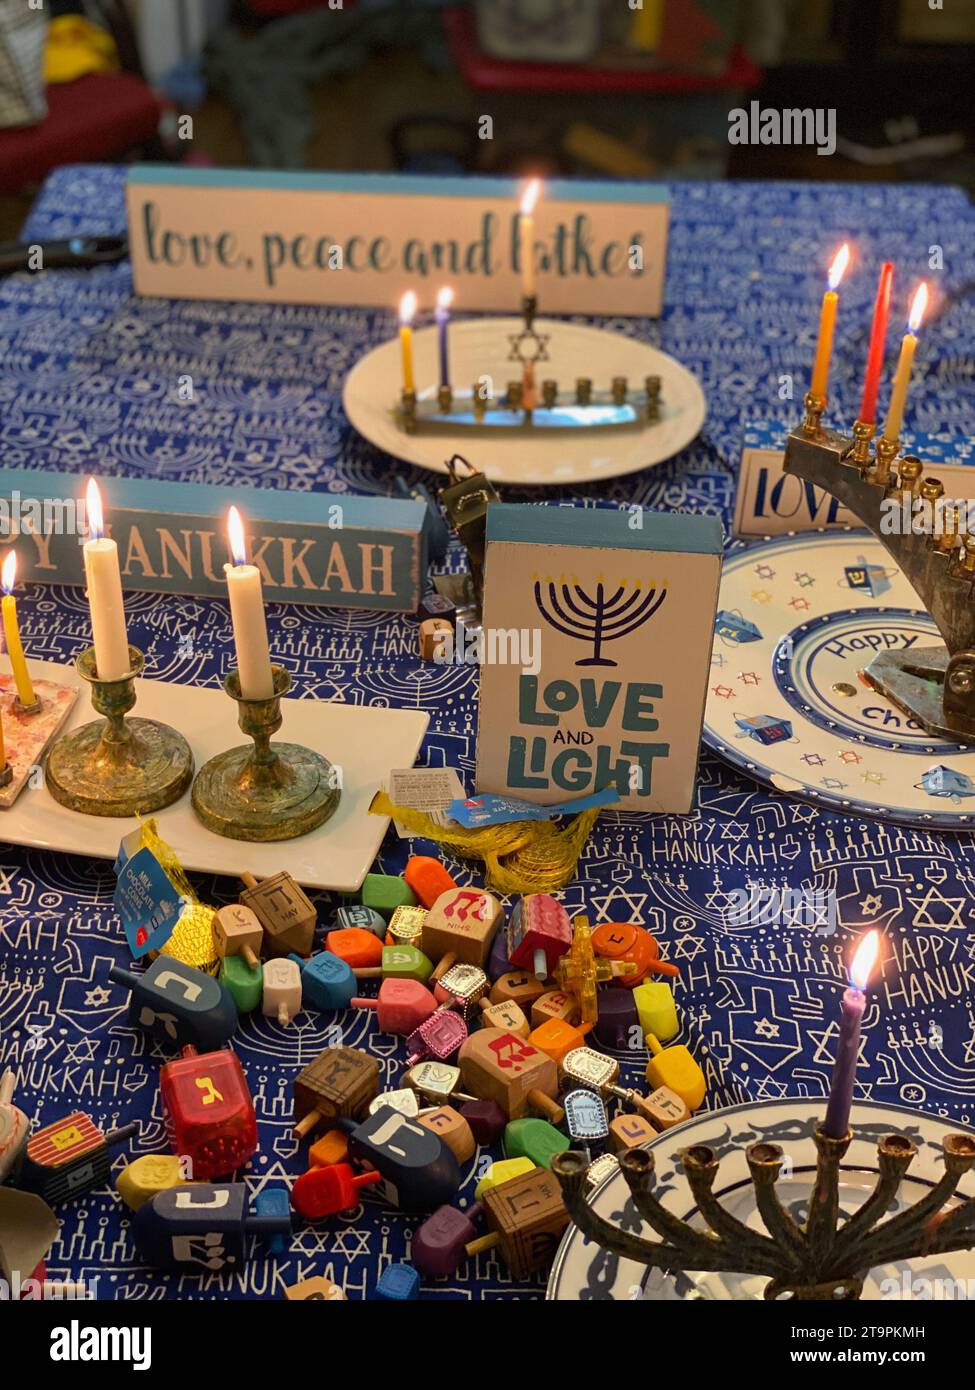 USA. 11th Dec, 2020. Love and Light. Hanukkah, the 2nd night plus the shamash (the helper) candle on the menorah. Draidels and chocolate coins are part of the festivities. Photo credit: Robyn Stevens Brody/Sipa USA. Credit: Sipa USA/Alamy Live News Stock Photo